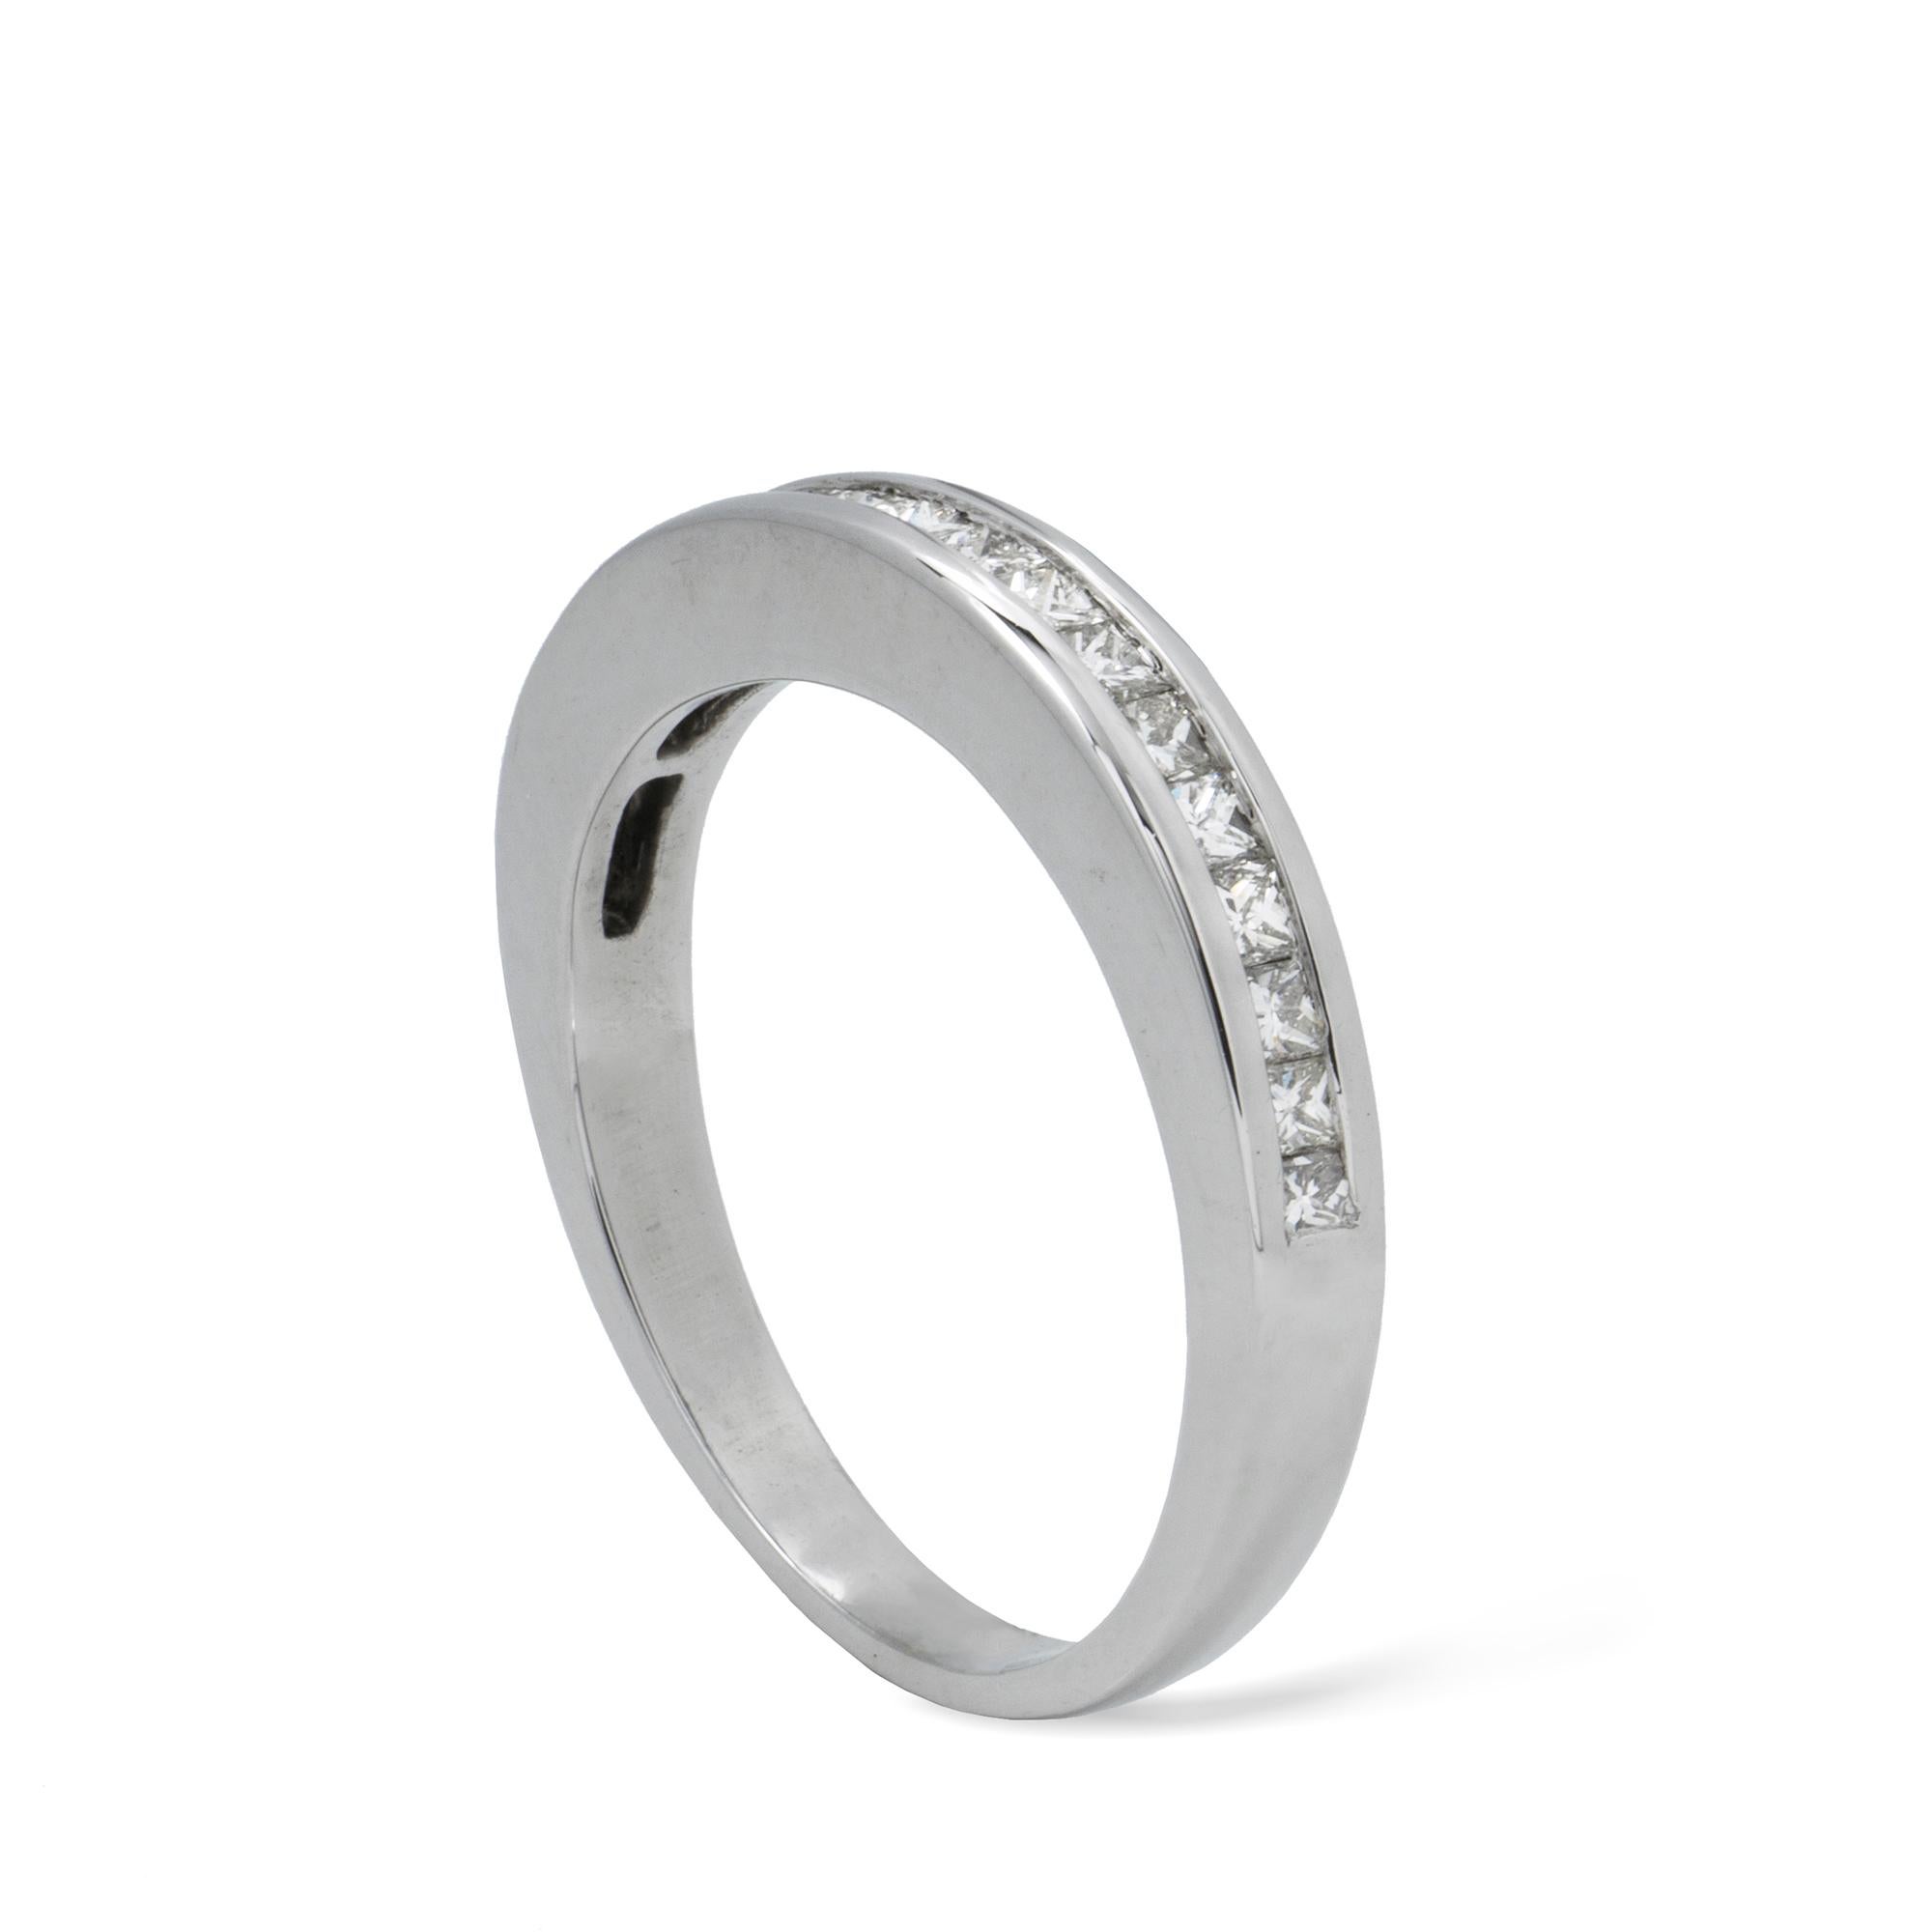 A half eternity diamond ring, the nineteen princess-cut diamonds with total estimated weight 0.50 carats, channel-set in a white gold mount, hallmarked 18ct gold London, bearing the Bentley & Skinner sponsor-mark, gross weight 2.5 grams,  Finger